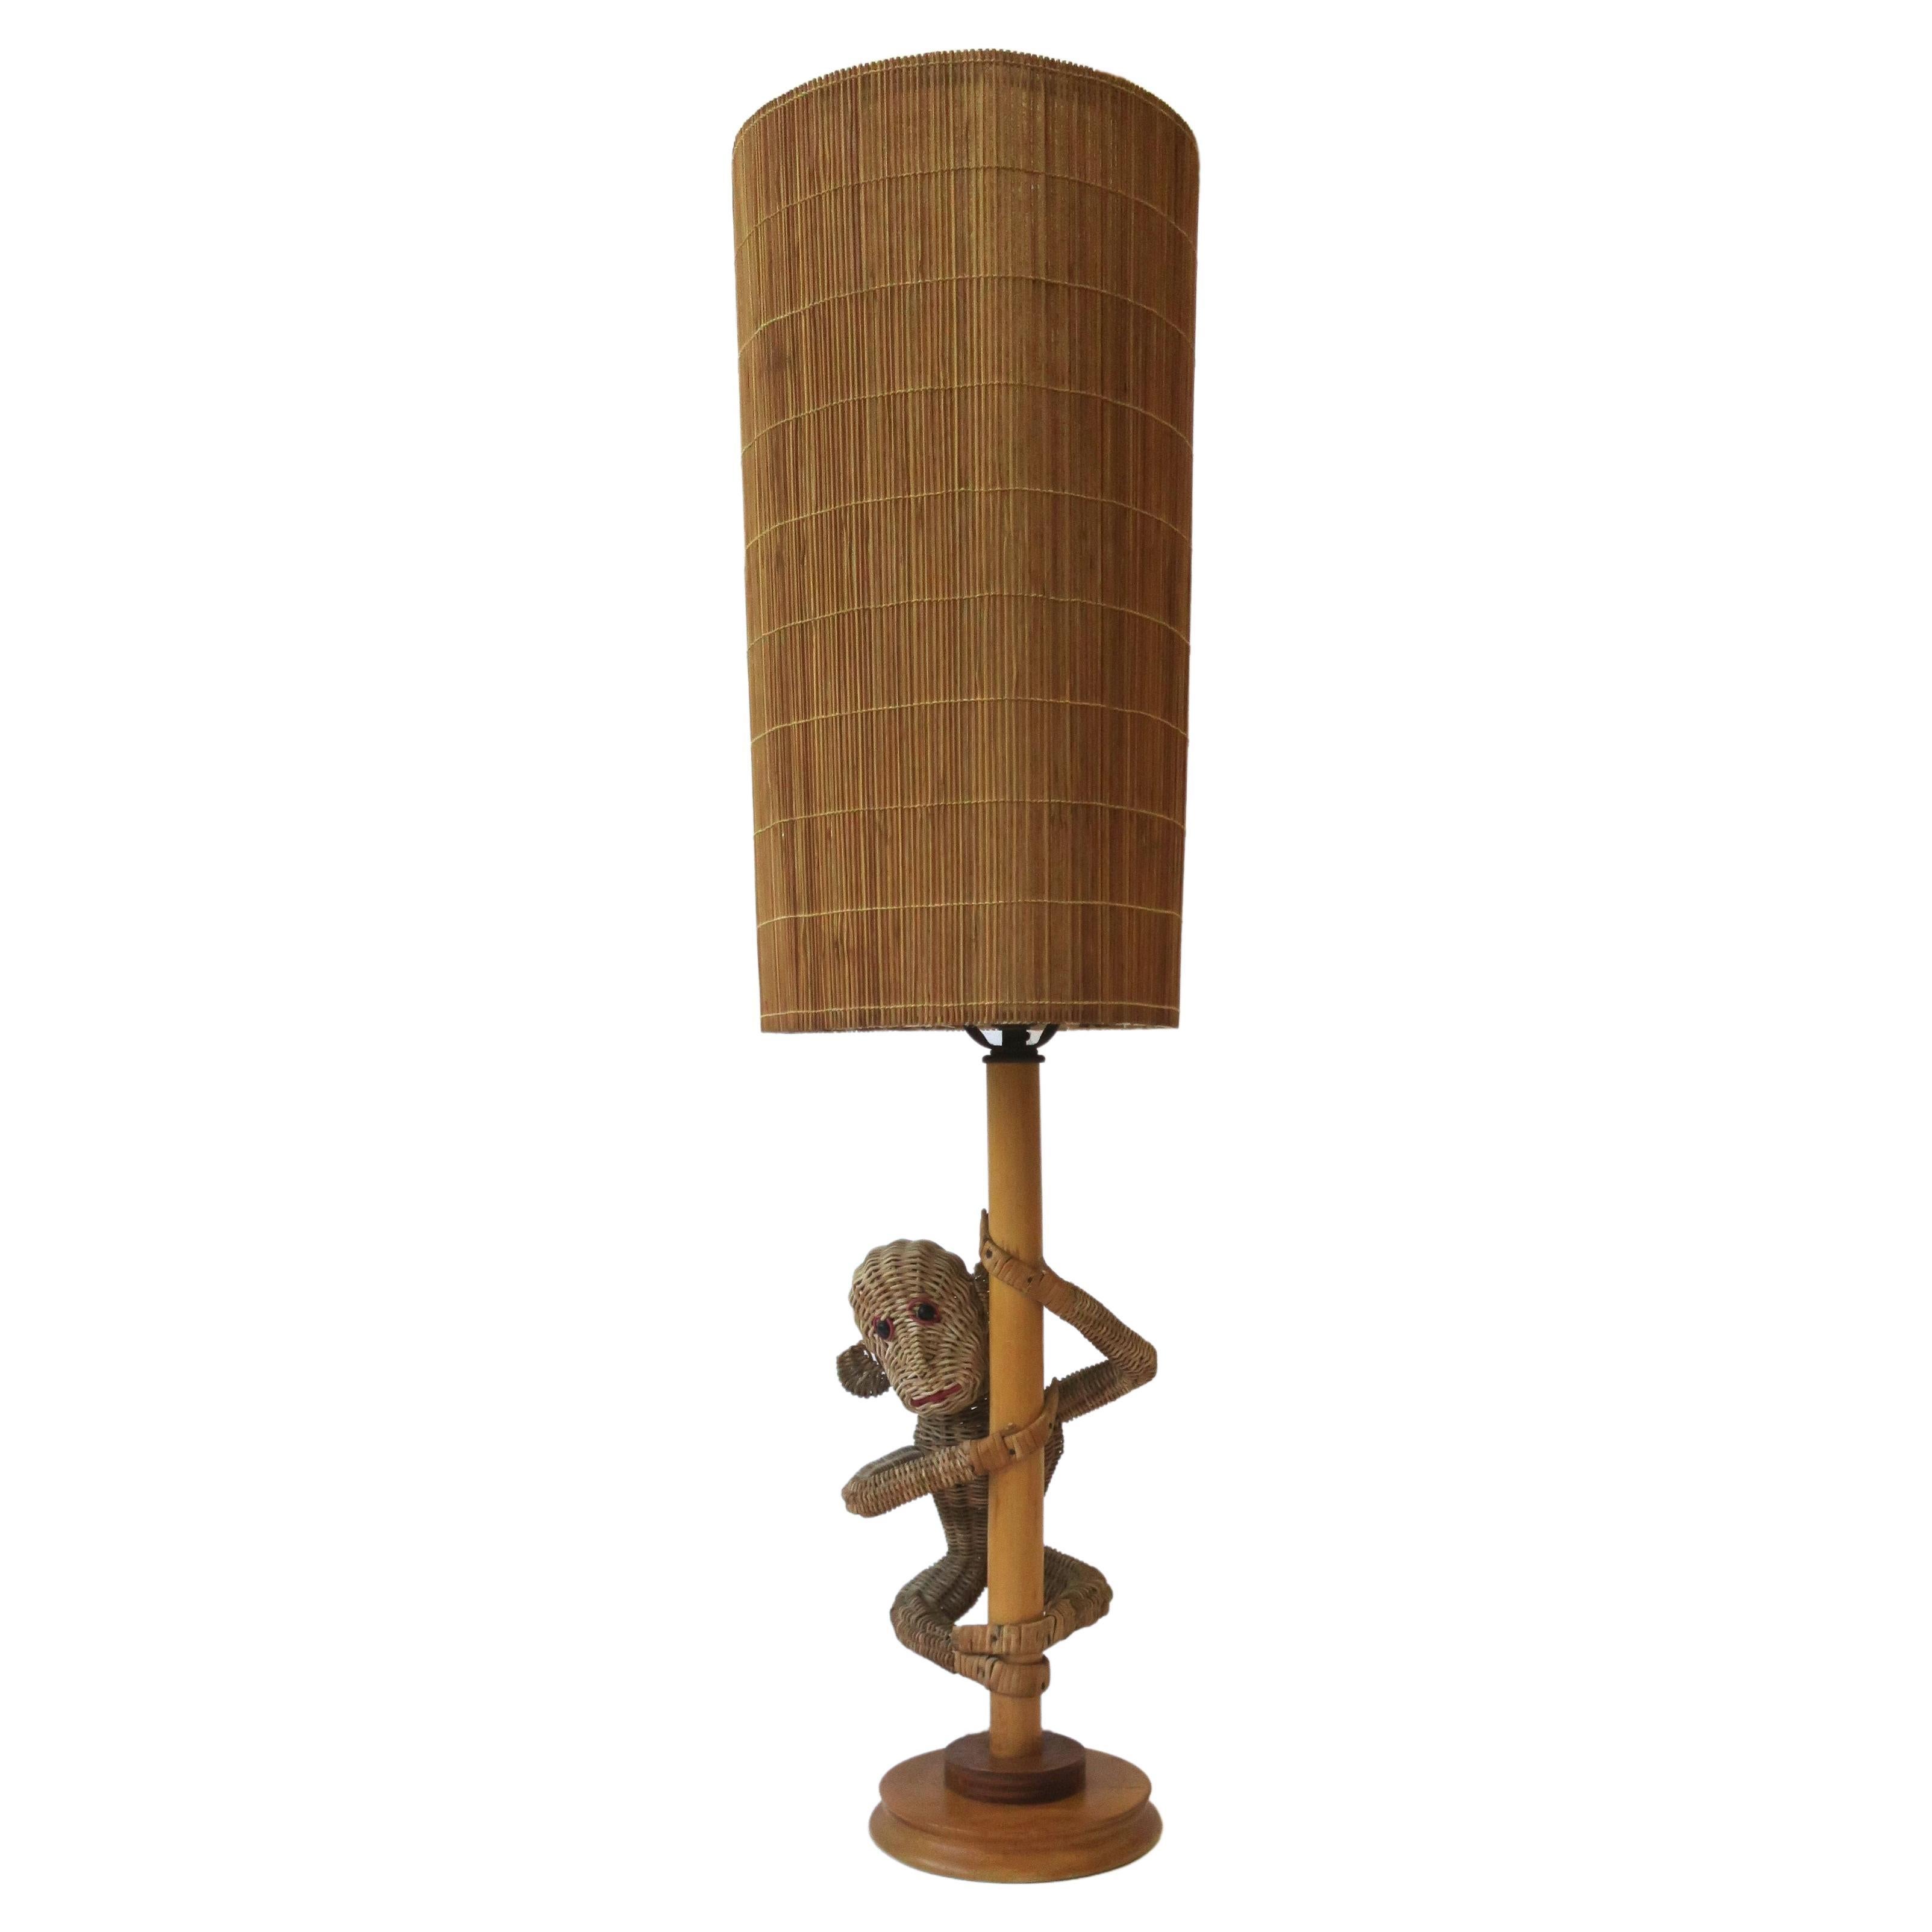 Wicker Rattan Monkey Lamp with Wicker Shade in the Lopez Style, circa 1970s